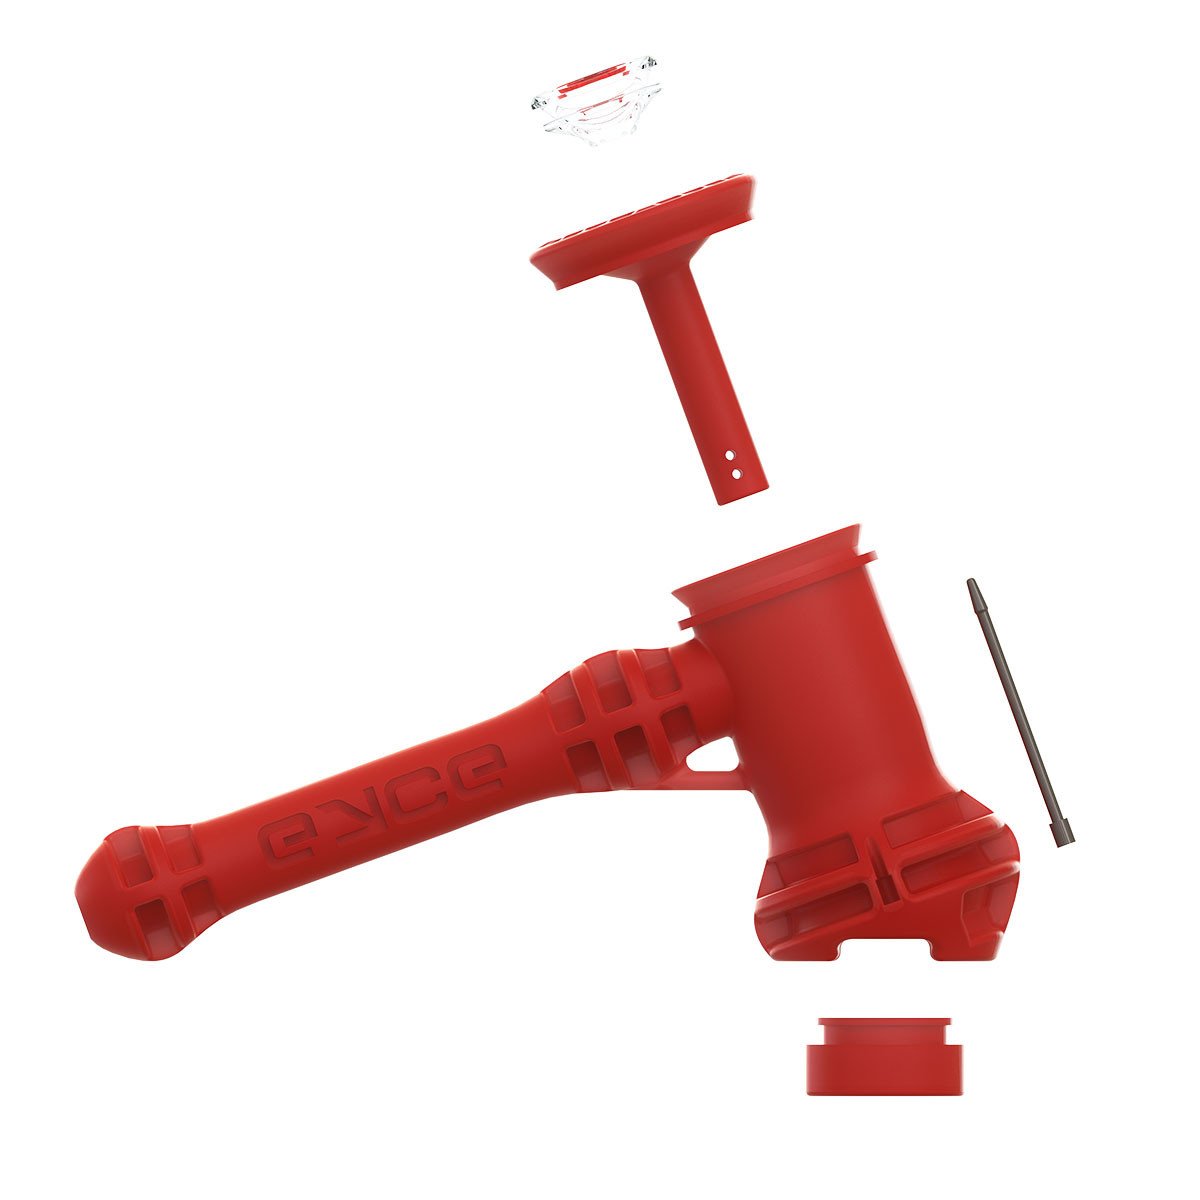 EYCE Hammer Bubbler in red silicone with disassembled view showing durability and easy cleaning